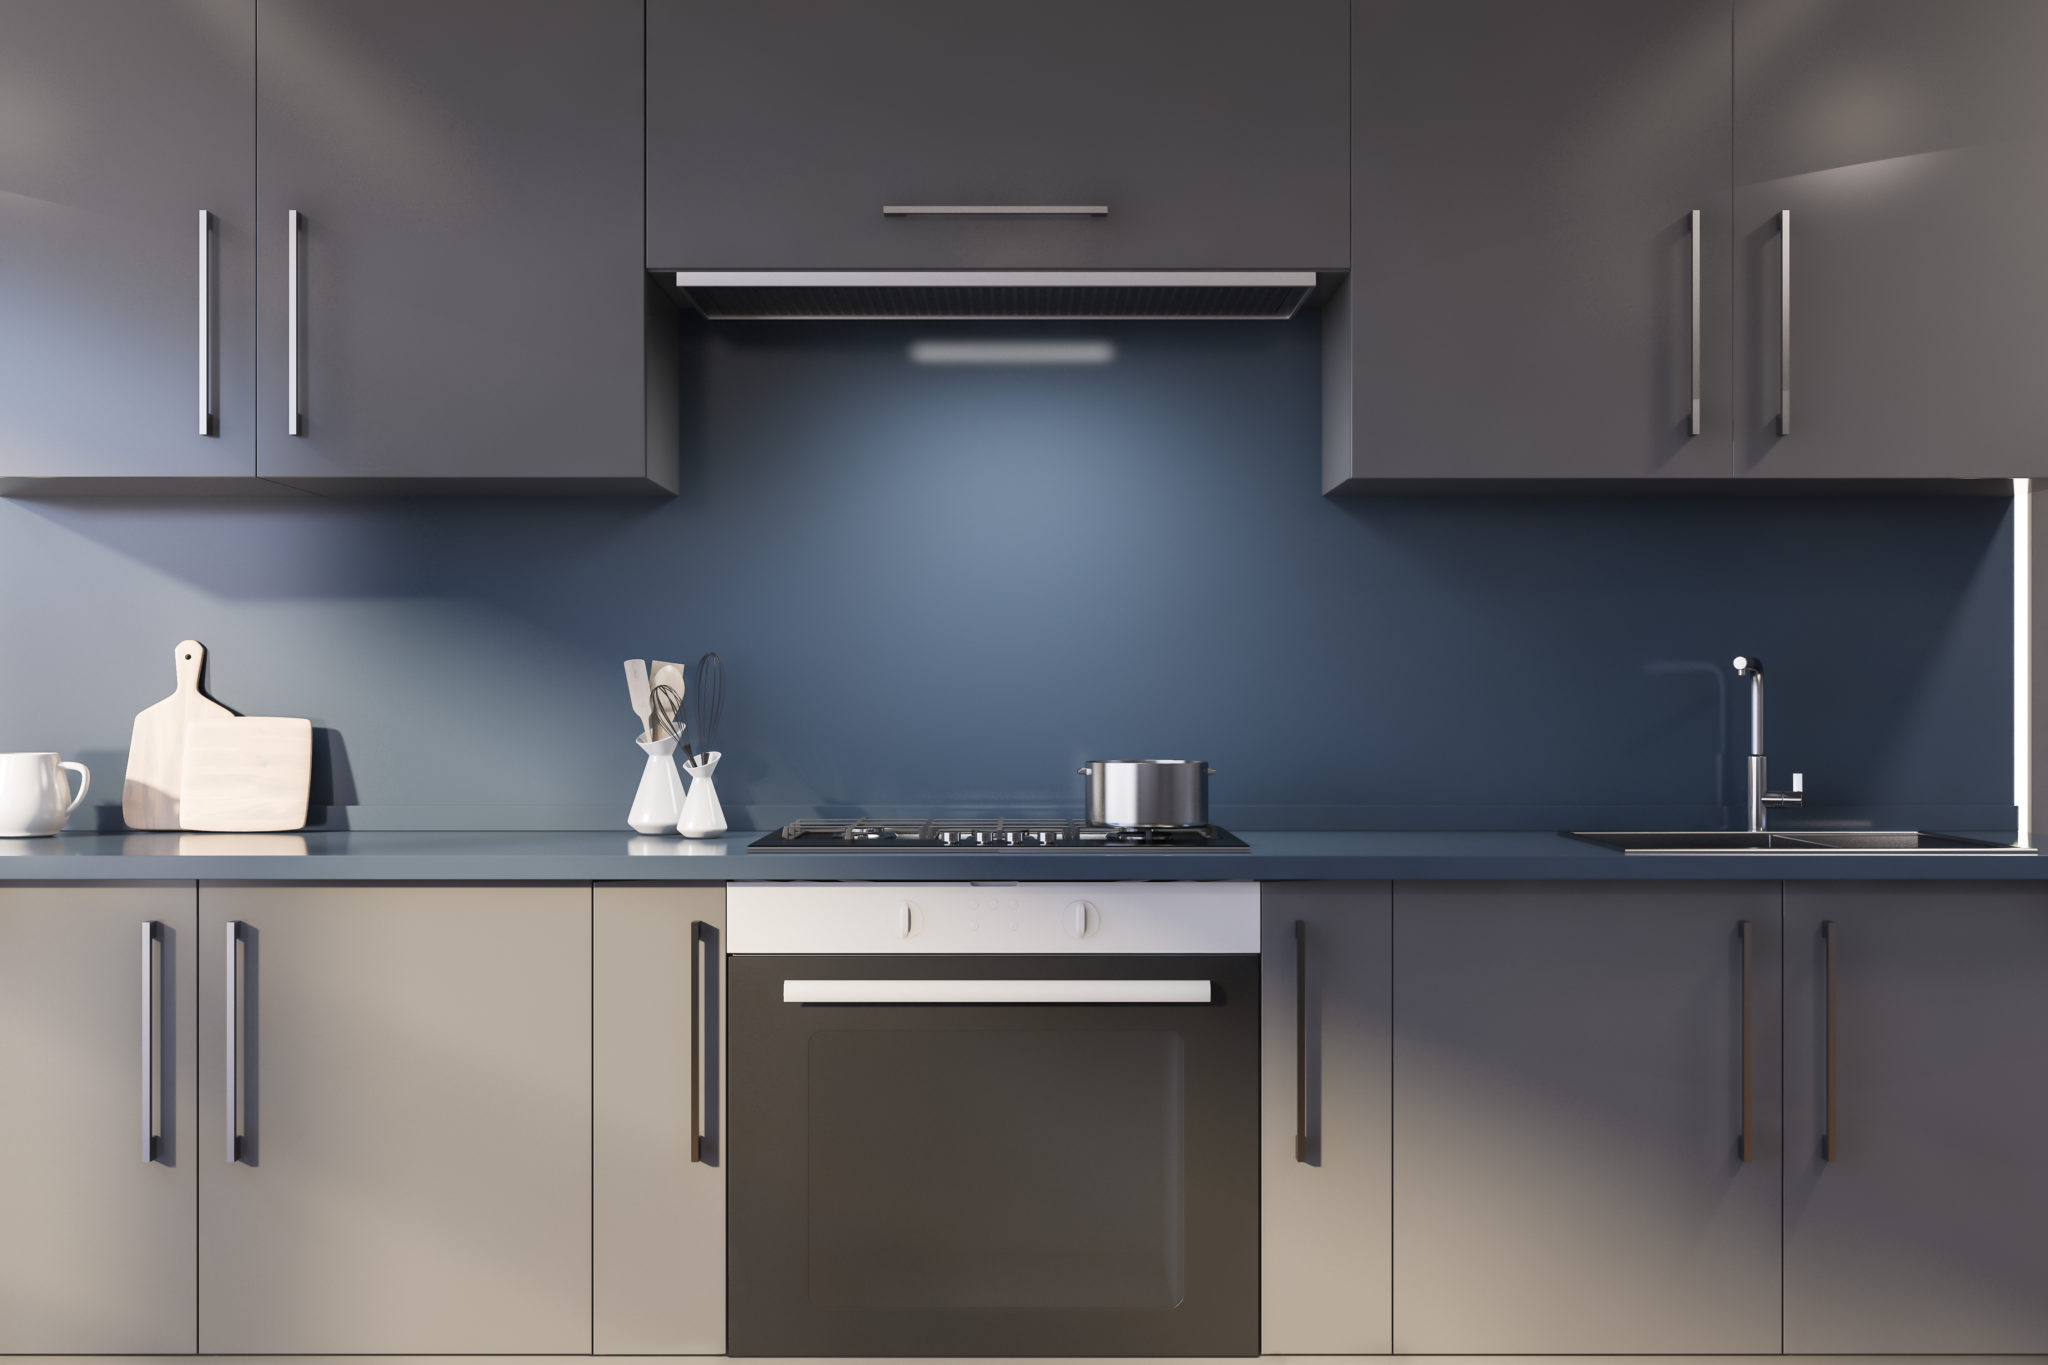 Blue kitchen with gray countertops